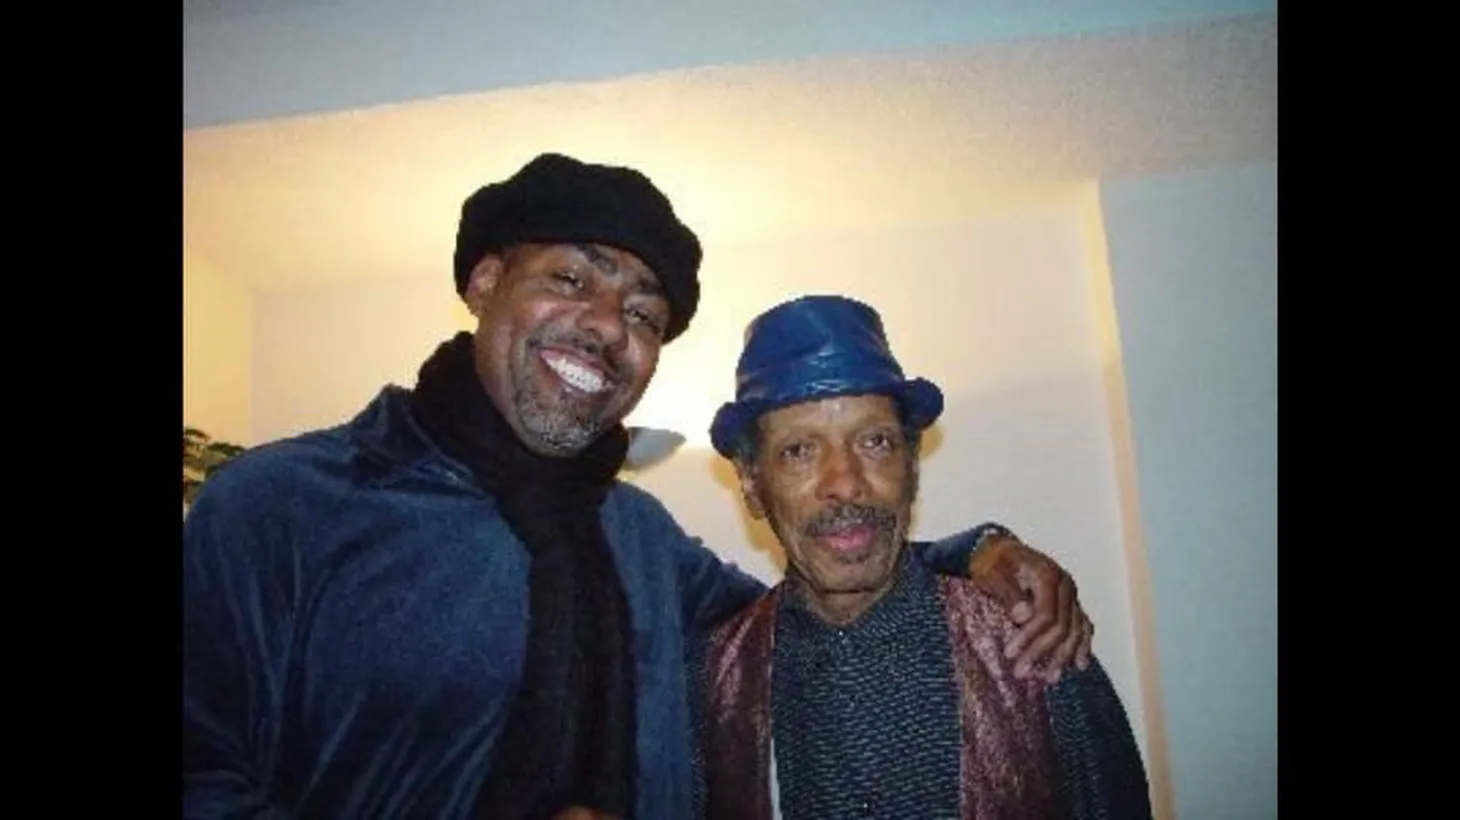 LeRoy Downs will be joining me on Strictly Jazz for a 3 hr. tribute to Ornette Coleman, who died last Wednesday at the age of 85.